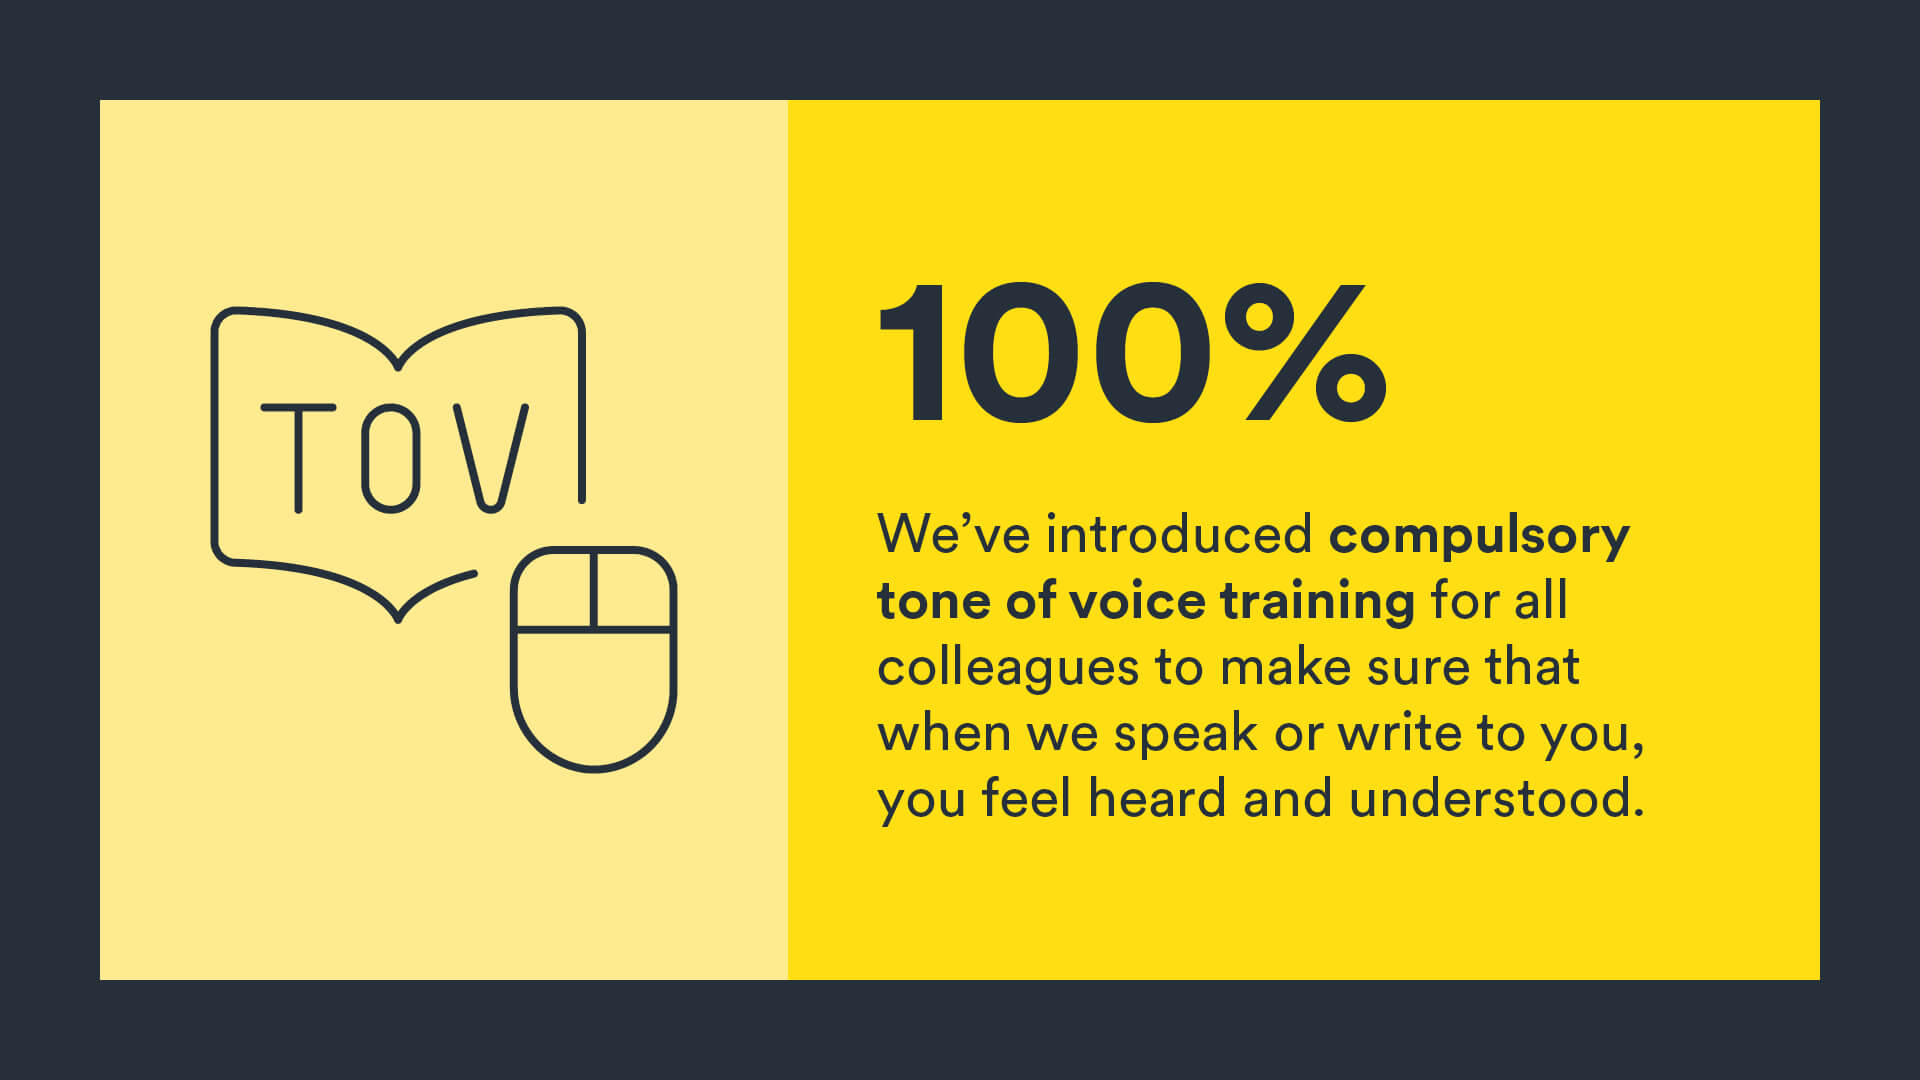 Infographic: we’ve introduced compulsory tone of voice training for all colleagues to make sure that when we speak or write to you, you feel heard and understood.